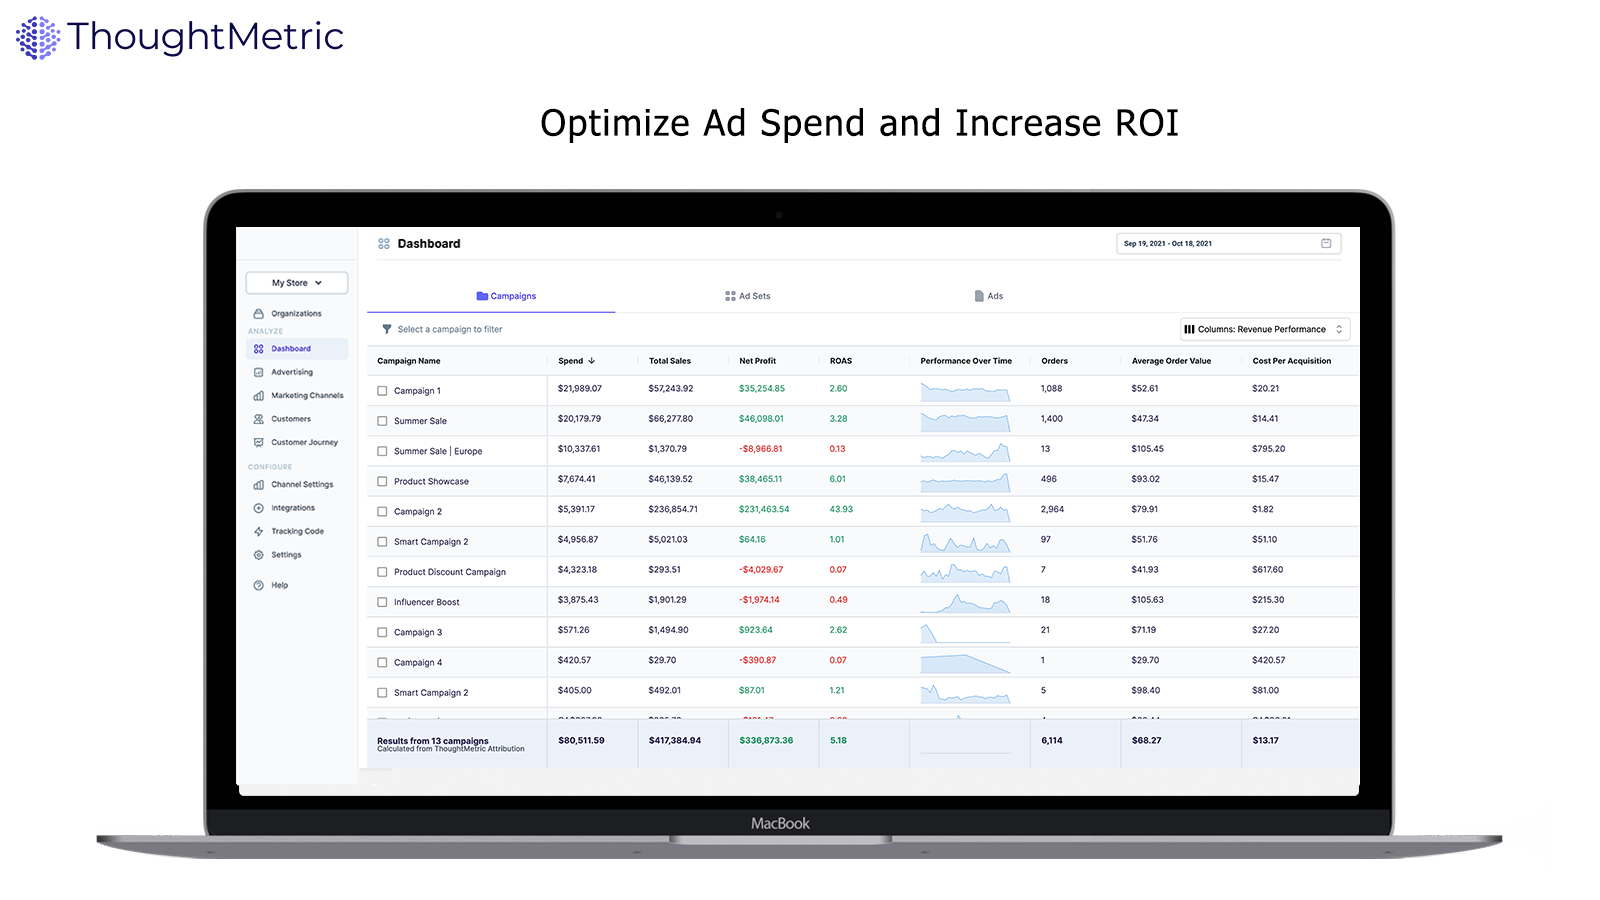 Optimize Ad Spend and Increase ROI